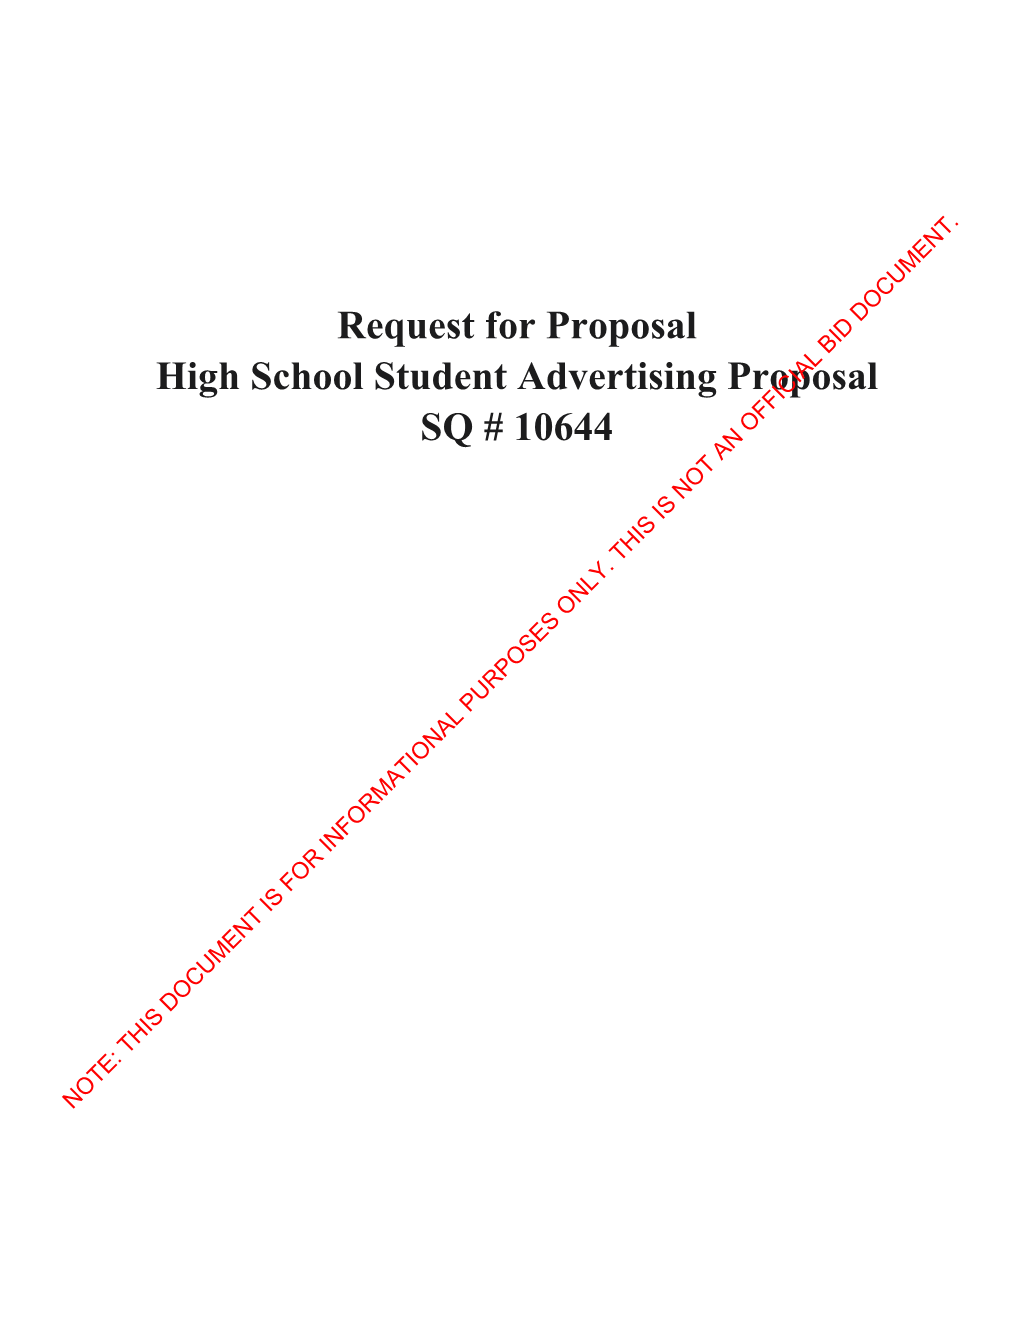 Request for Proposal High School